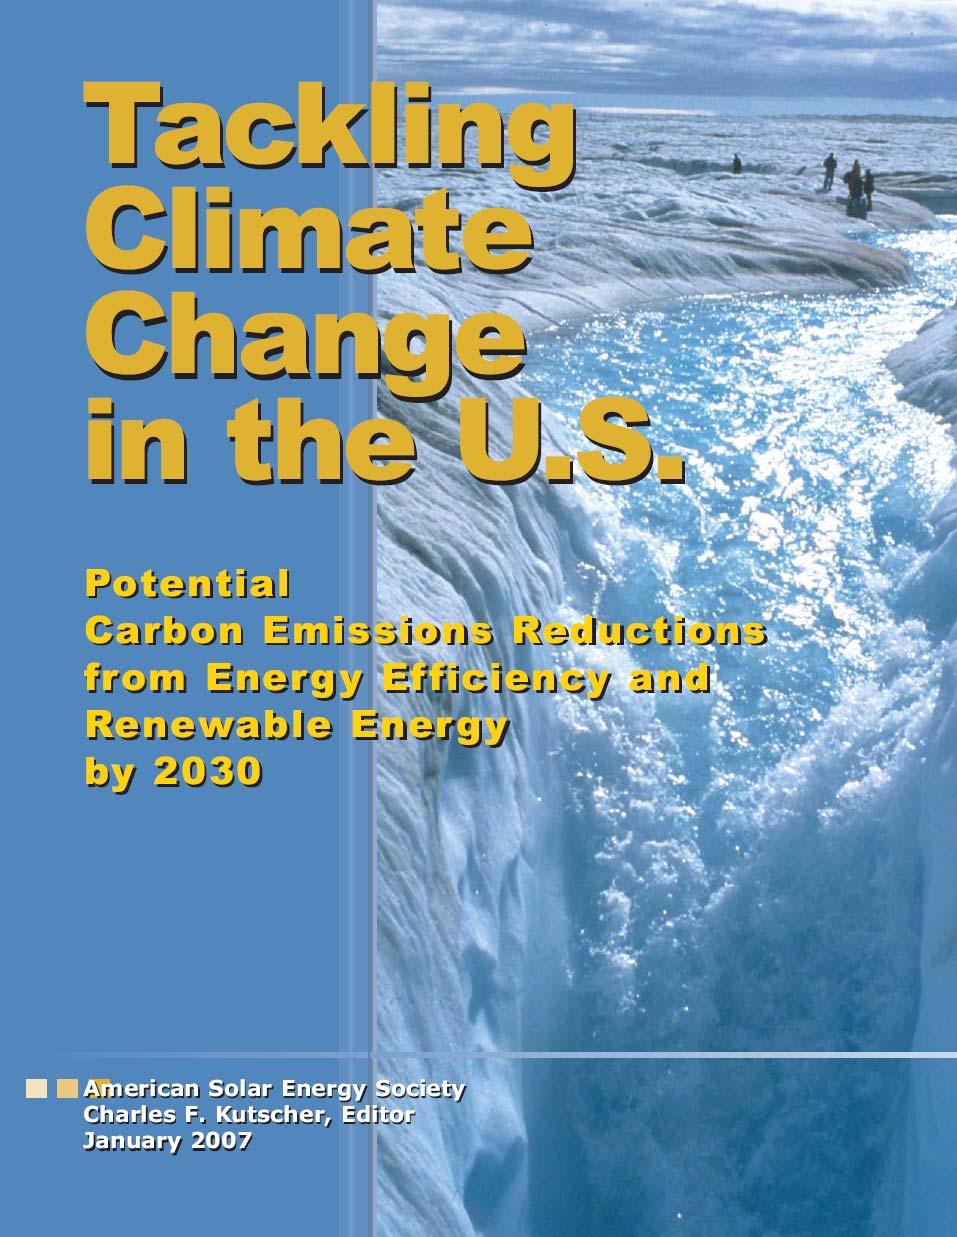 ASES report released Jan. 31, 2007 Available at: www.